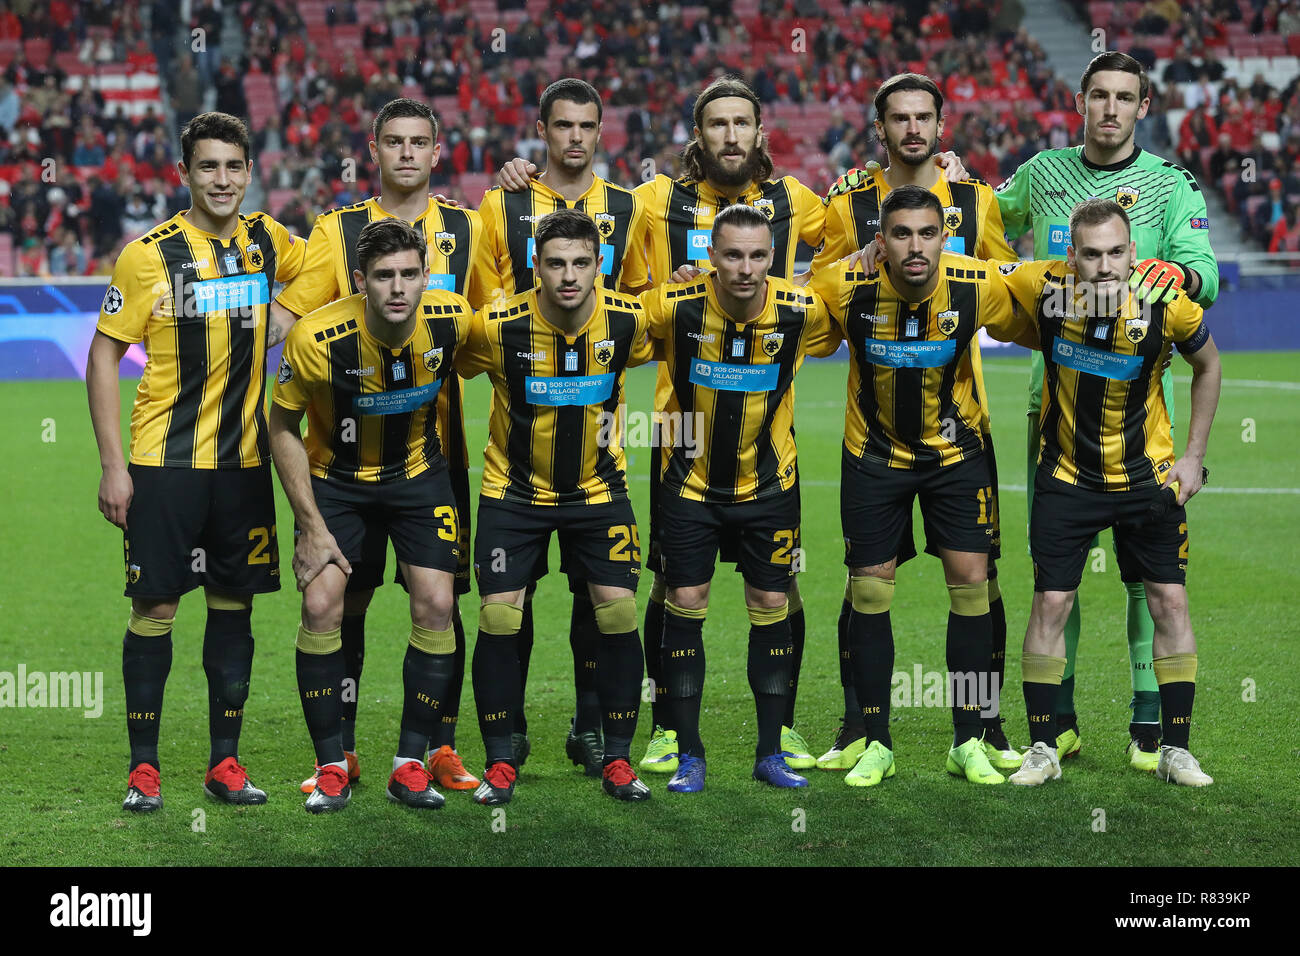 Lineup of the AEK Athens F.C. team during the UEFA Champions League 2018/19  football match between SL Benfica vs AEK Athens F.C. (Final score: SL  Benfica 1-0 AEK Athens F.C Stock Photo - Alamy